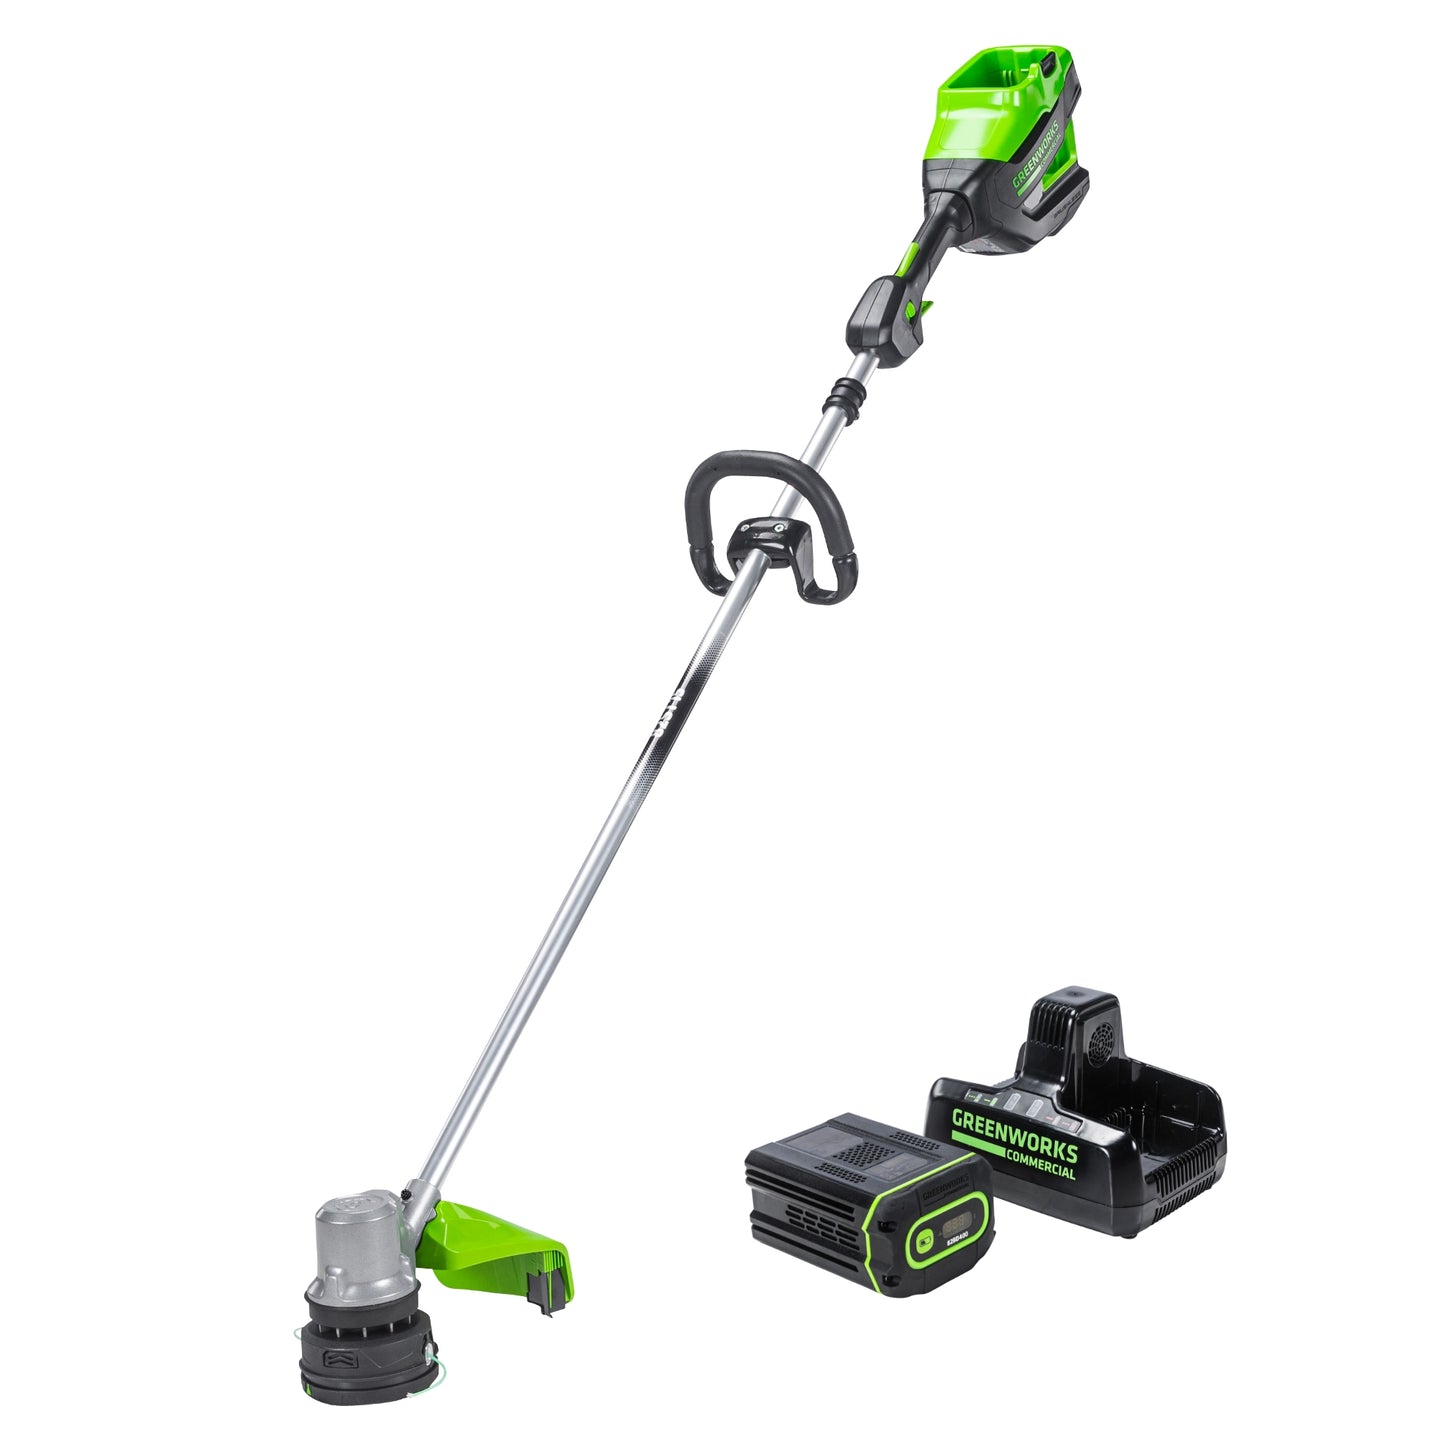 82V 1.5kW String Trimmer with 4Ah Battery and Dual Port Charger (82ST15-4DP)